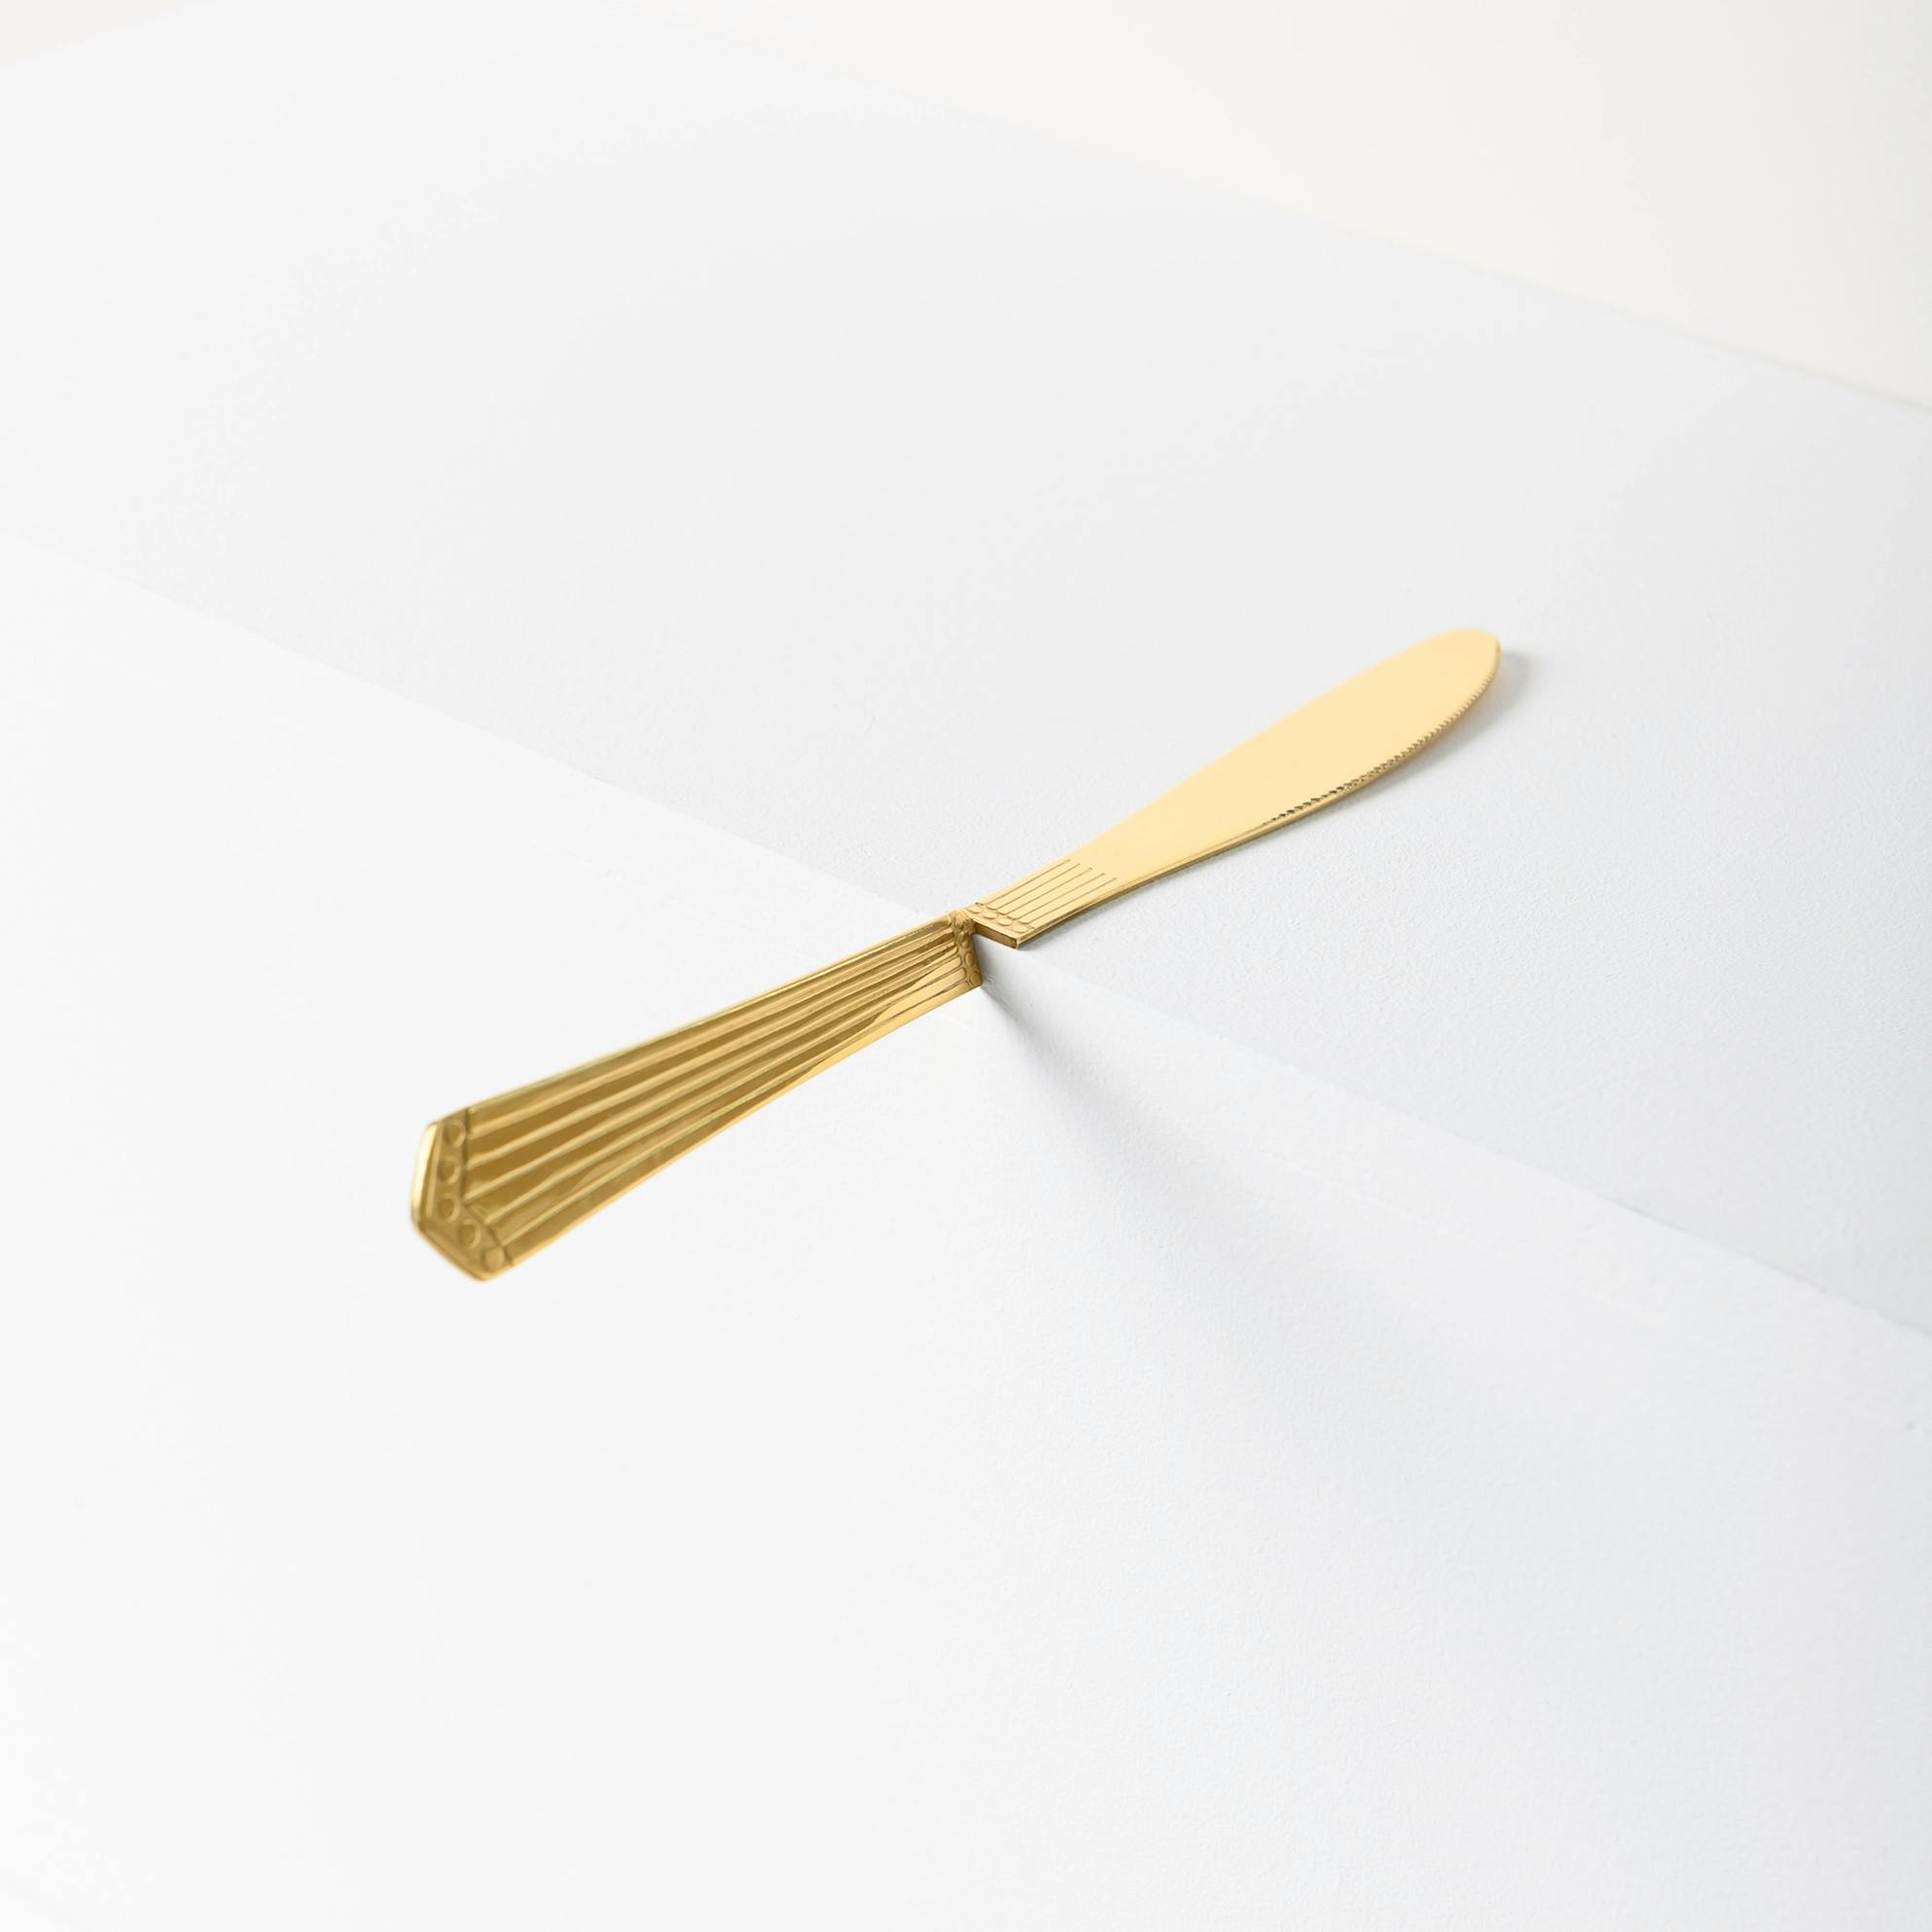 Golden Ration Knife by Kathleen Reilly, 2019